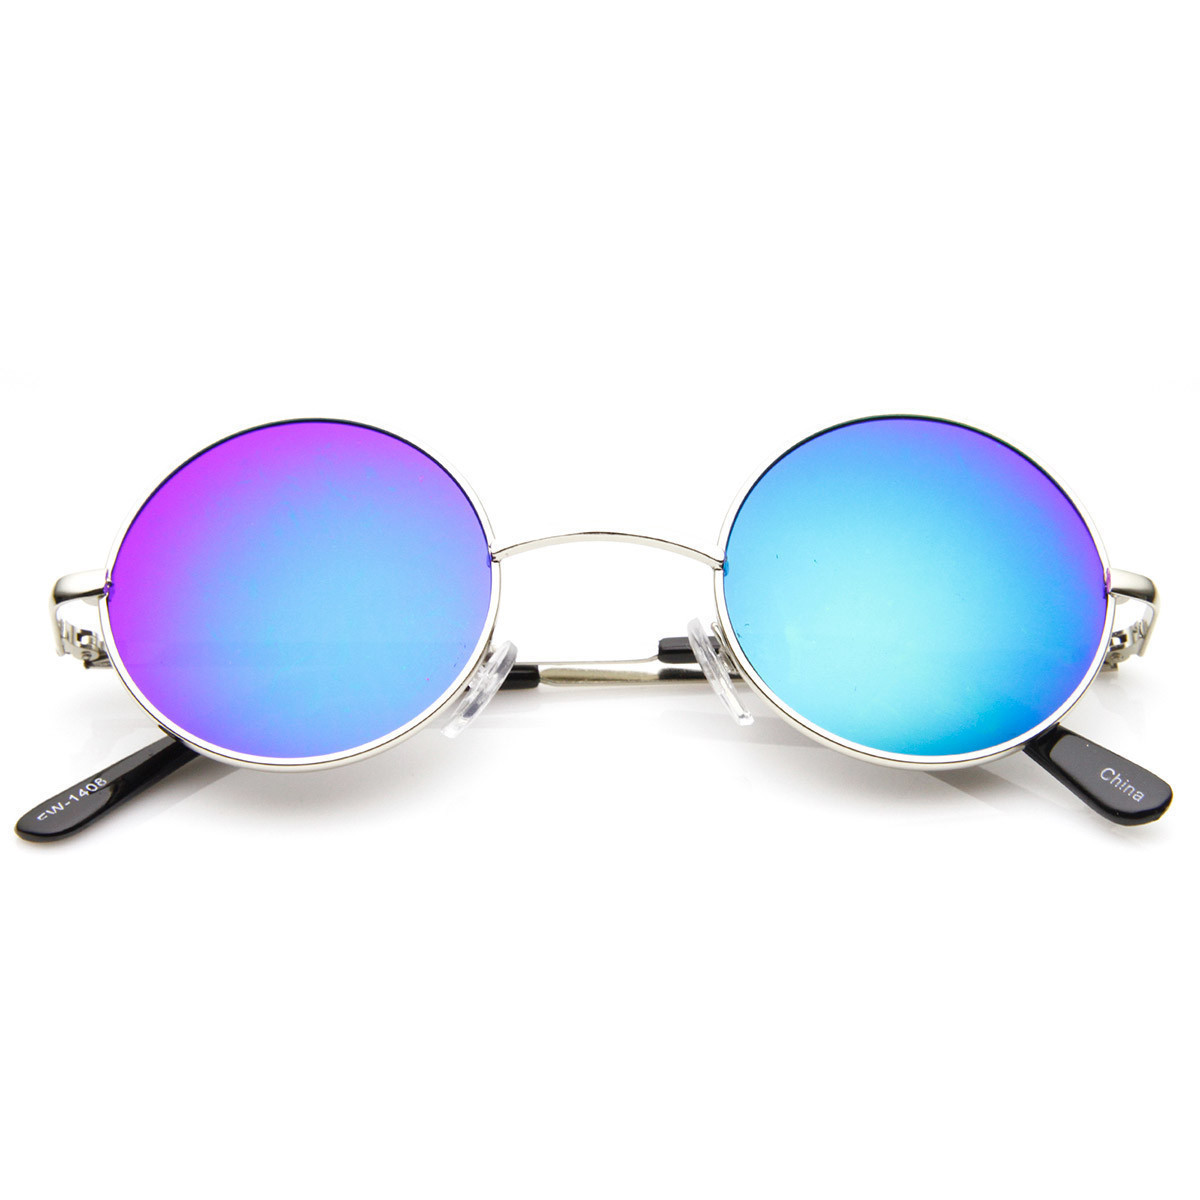 Lennon Style Round Circle Metal Sunglasses With Color Mirror Lens - 1408 - Silver Sun